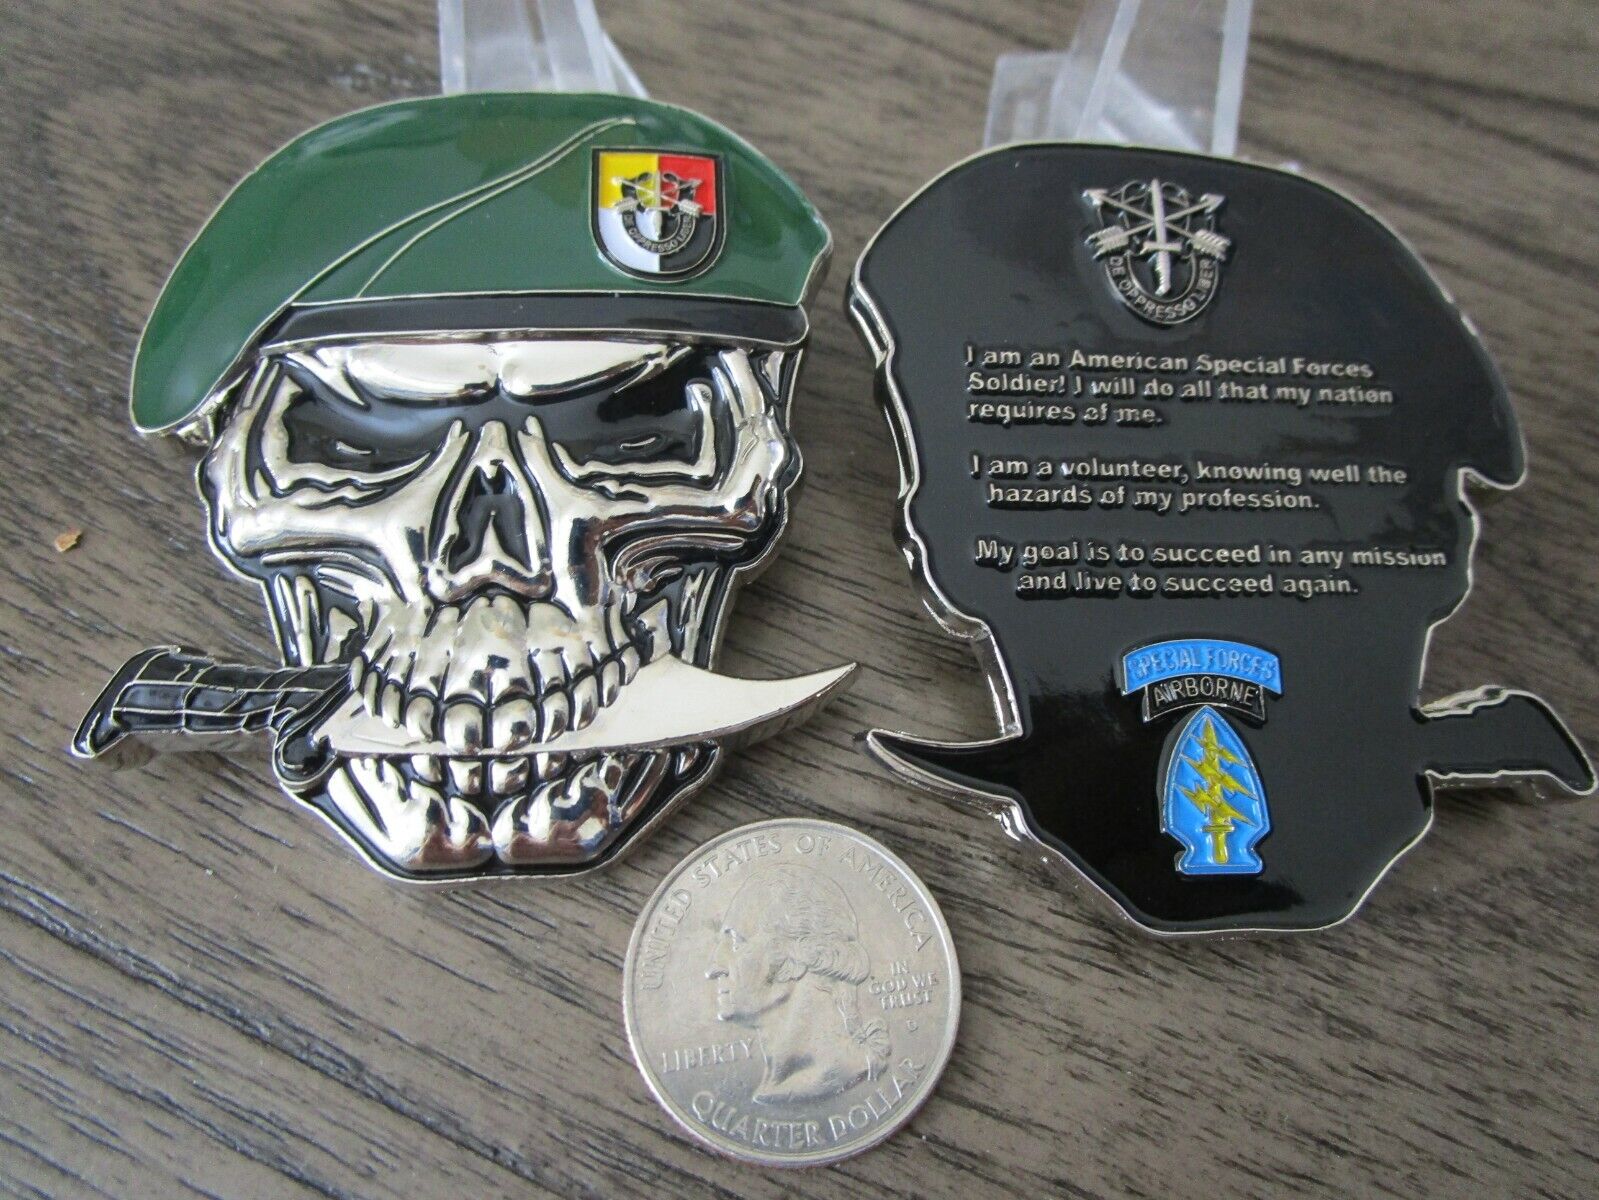 US Army Special Forces Group Creed Green Berets 3rd SFG (A) Skull Challenge Coin